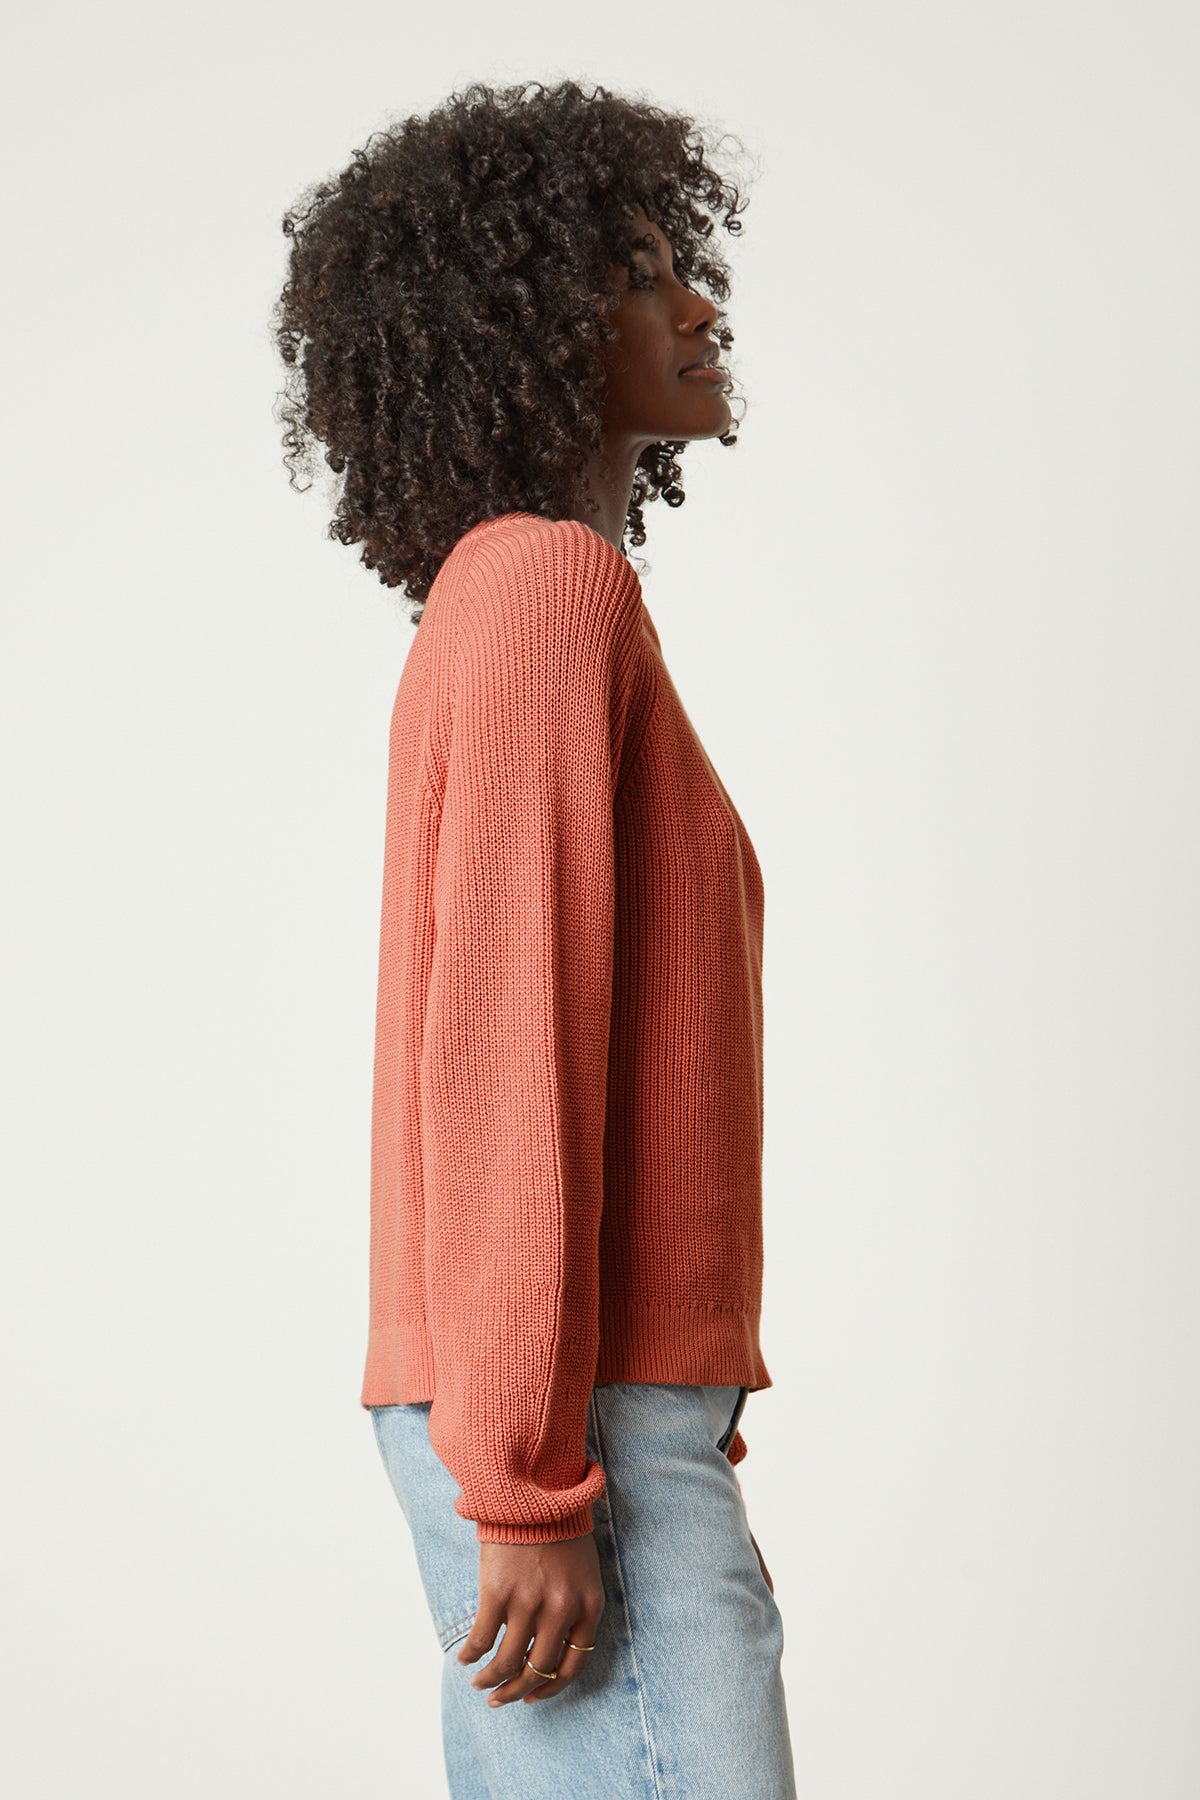 The back view of a woman wearing the Velvet by Graham & Spencer LINAH CREW NECK SWEATER and jeans.-25916268871873